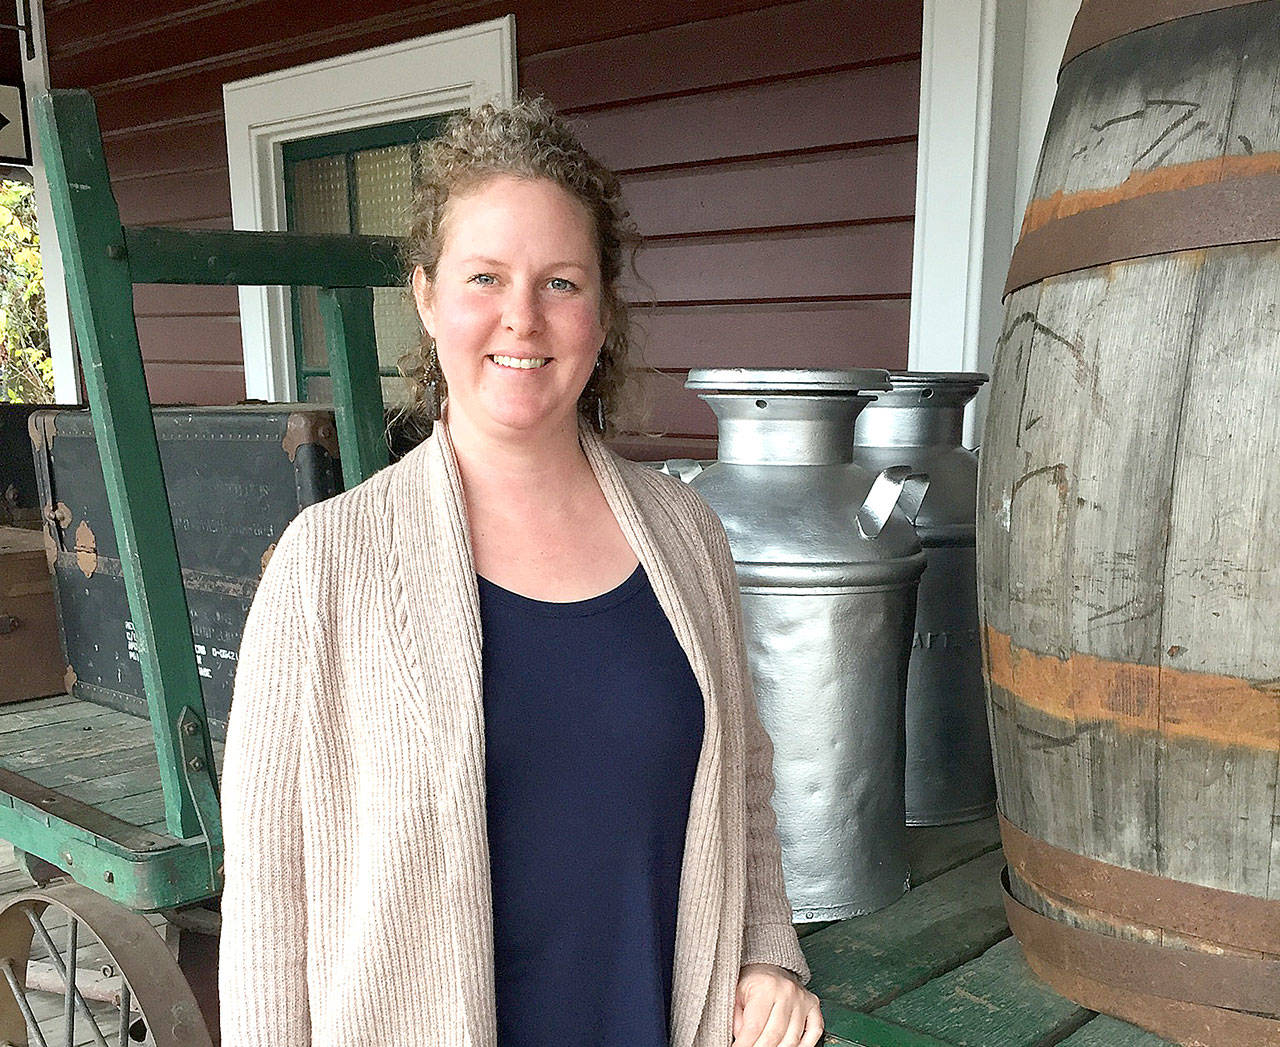 Elizabeth Rudrud is the new volunteer and event coordinator for Northwest Railway Museum’s annual celebration of Railroad Days, set for Aug. 17 to 19. (Courtesy Photo)